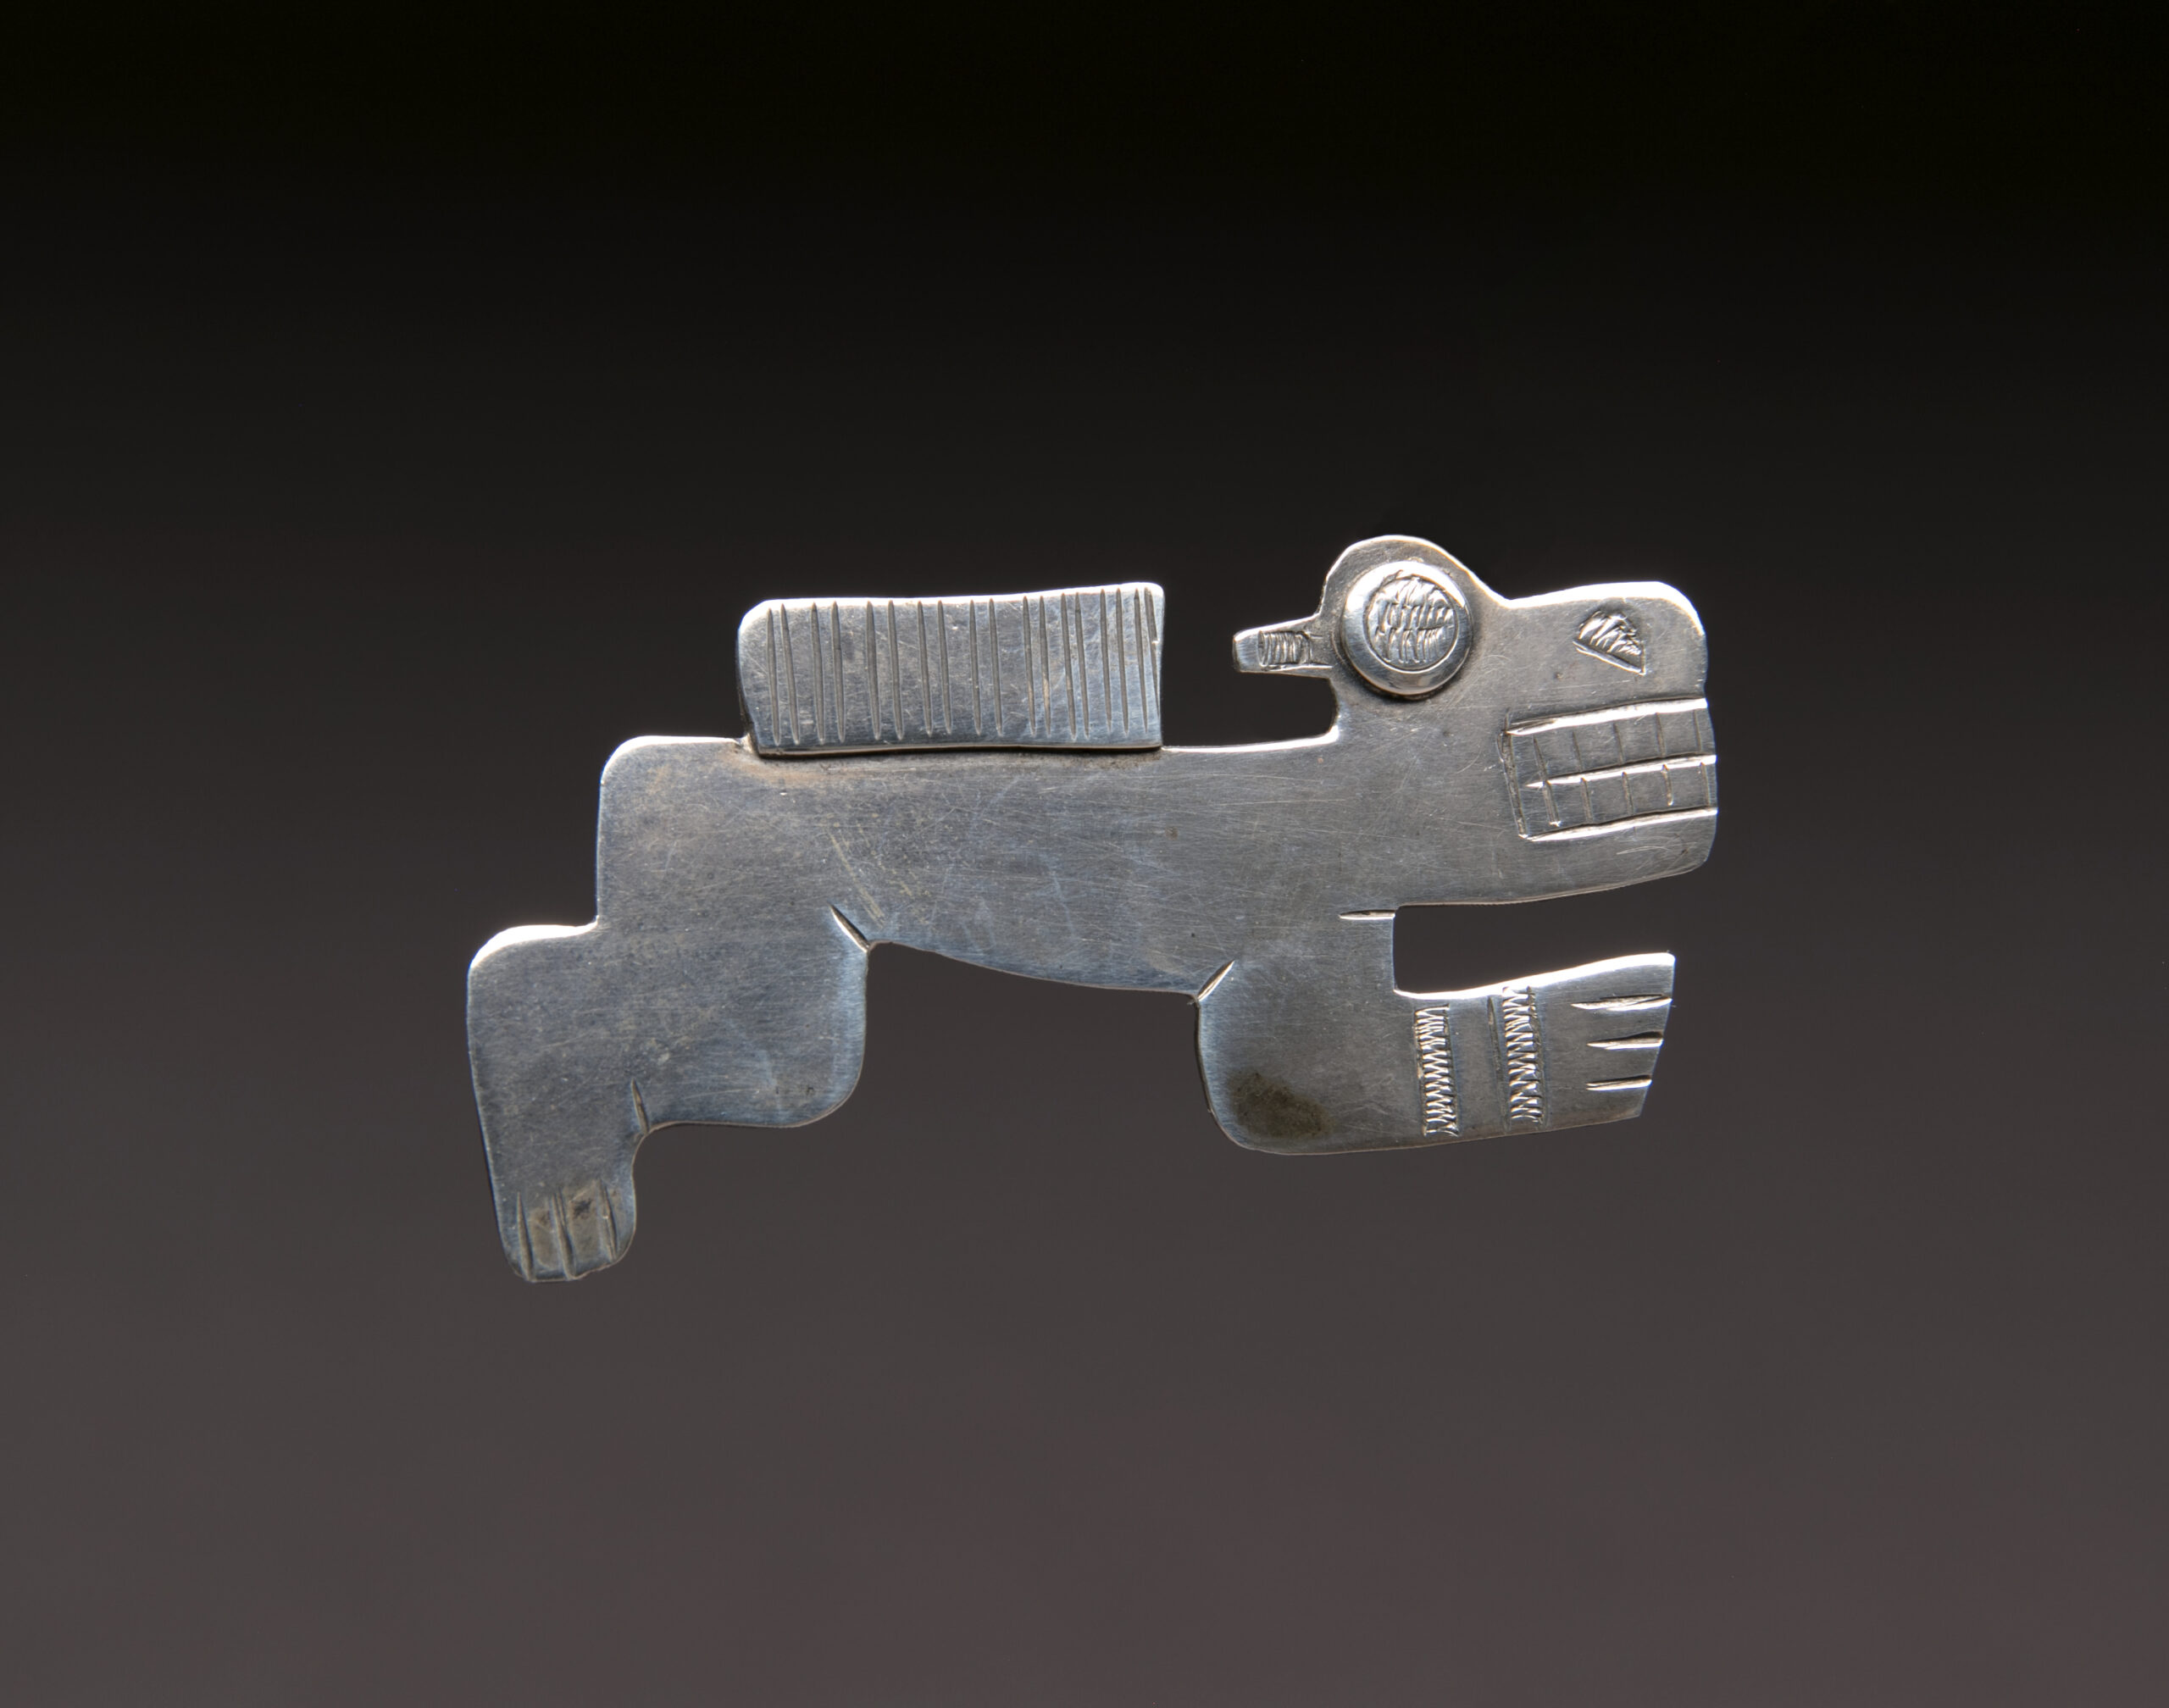 Pre-Columbian style silver pin in shape of a stylized reclining animal, engraving and carving on surface.